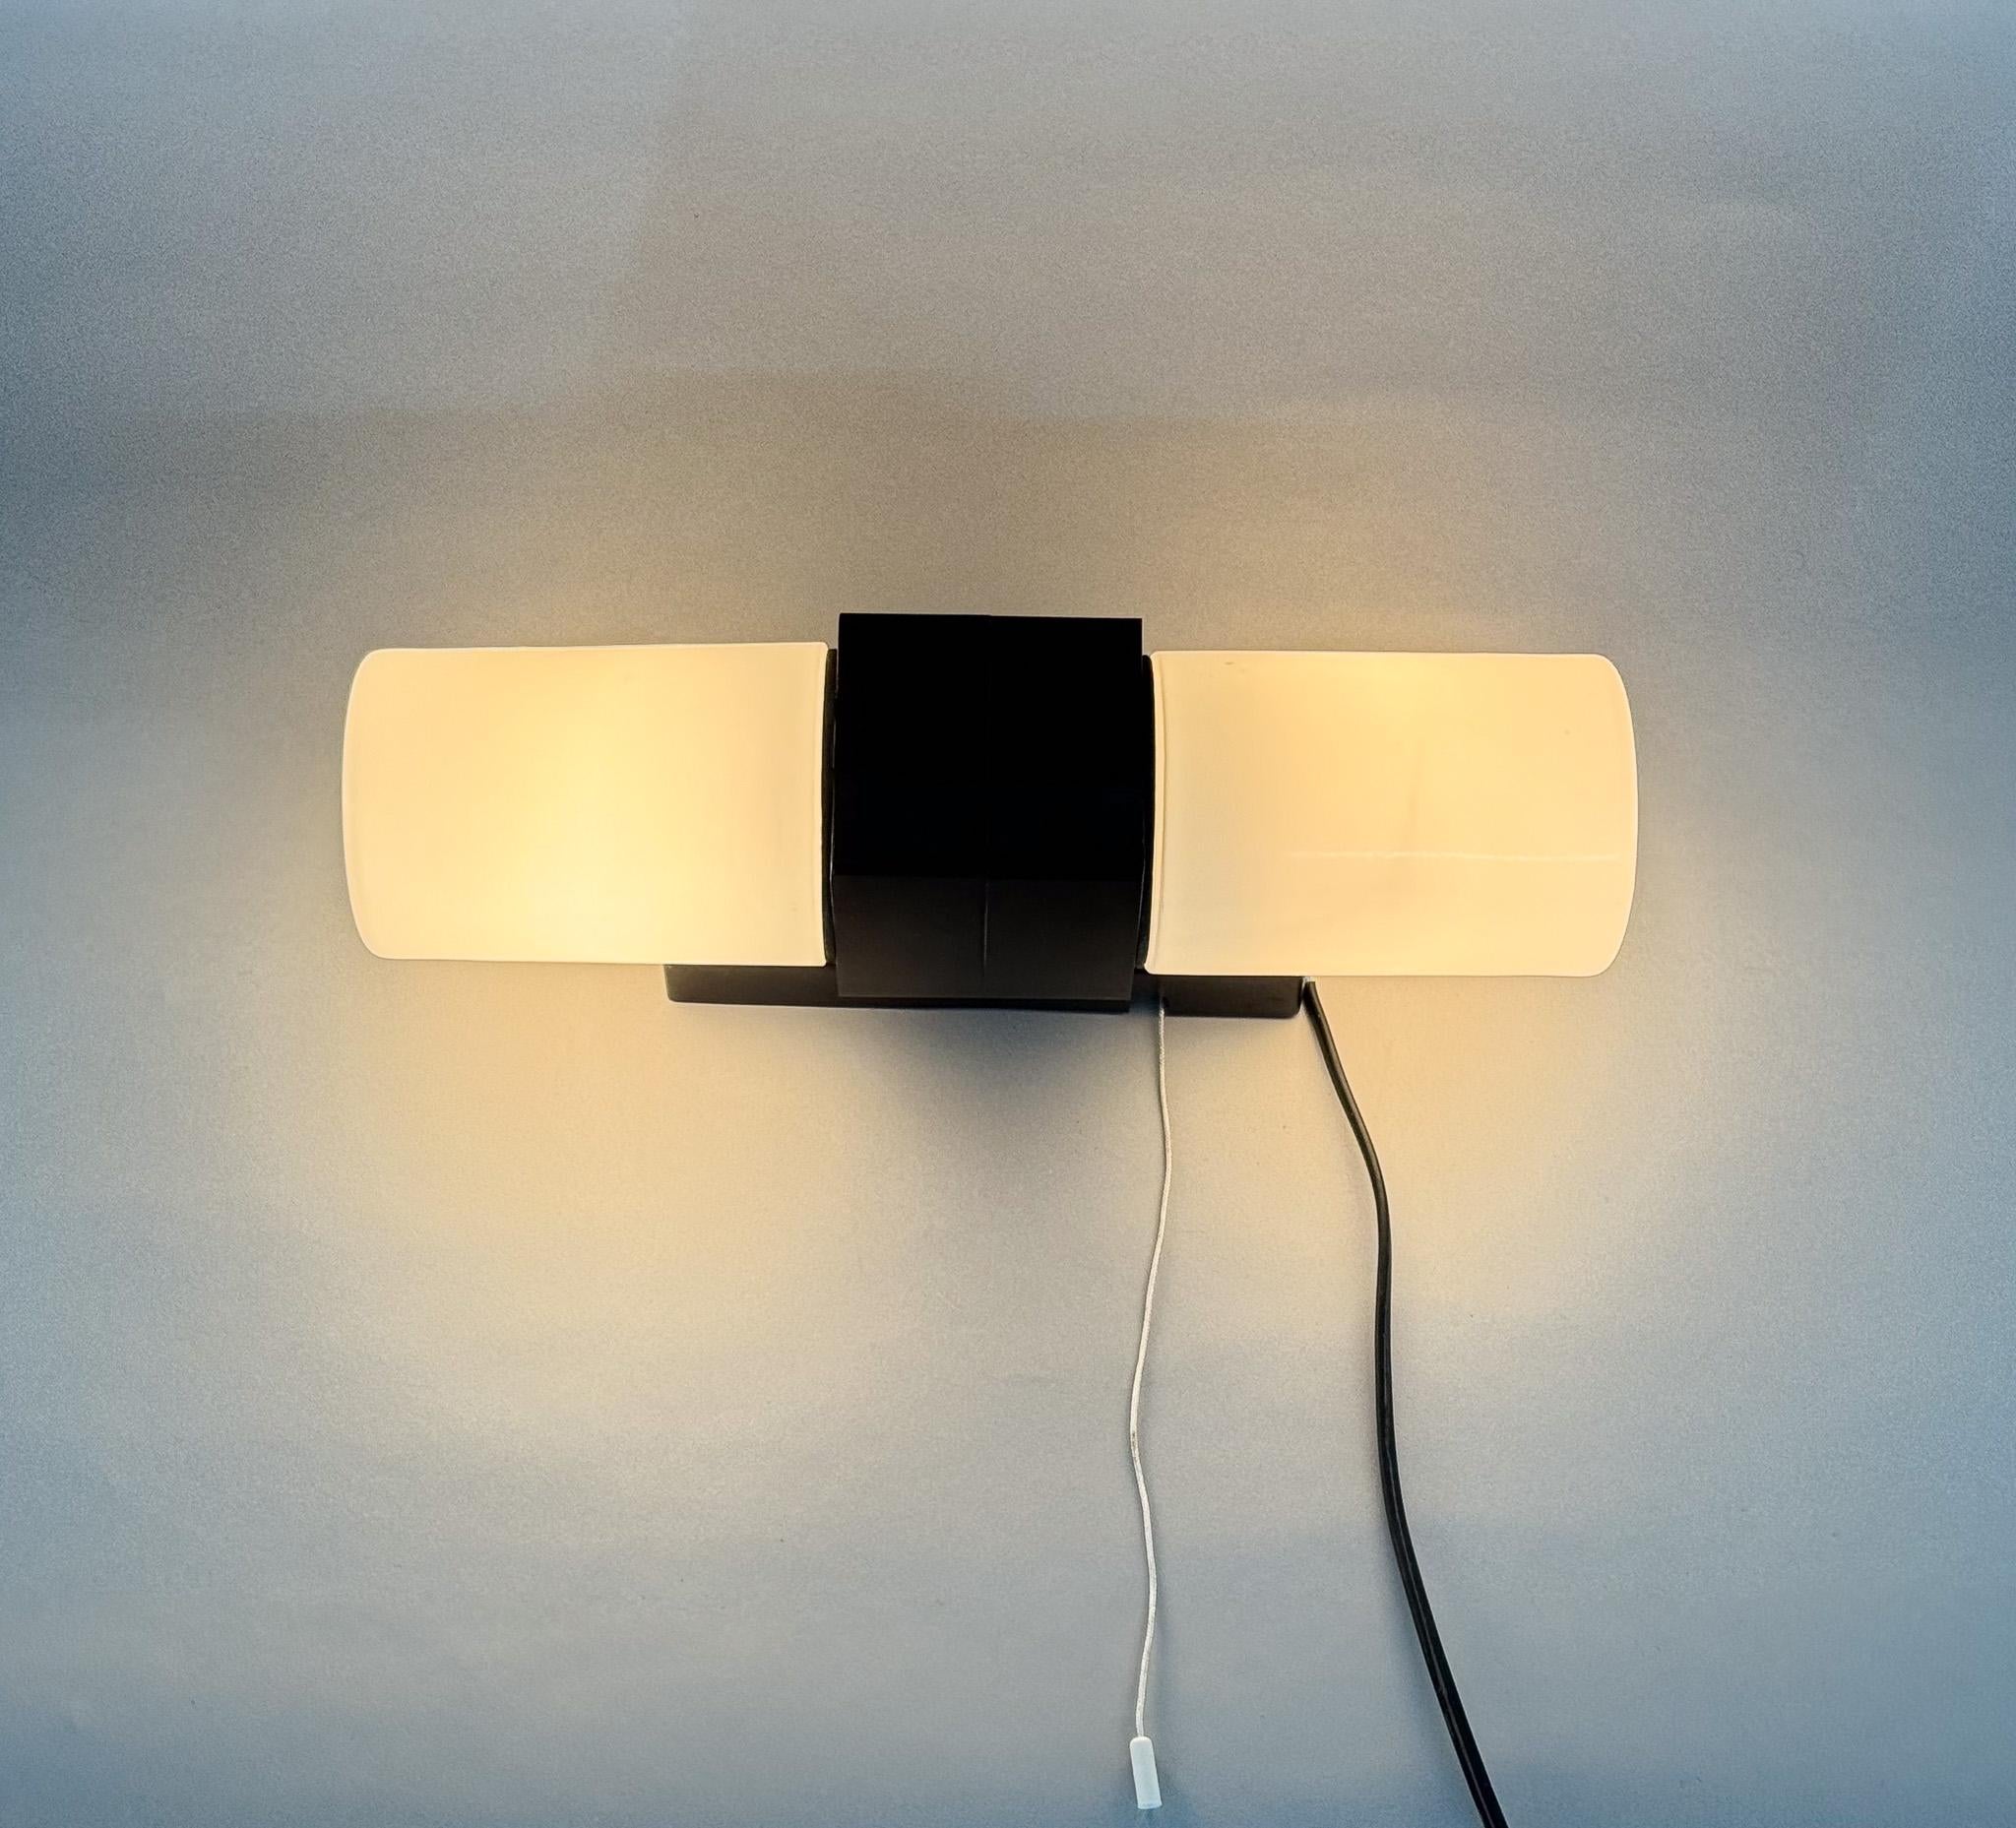 Designed in the 1950s in former Czechoslovakia as bathroom light above a mirror with a cord switch. Bakelite holders and opal glass shades. Seal rubber against moisture. Bulbs E14-E15, 2x40W. US compatible cable.